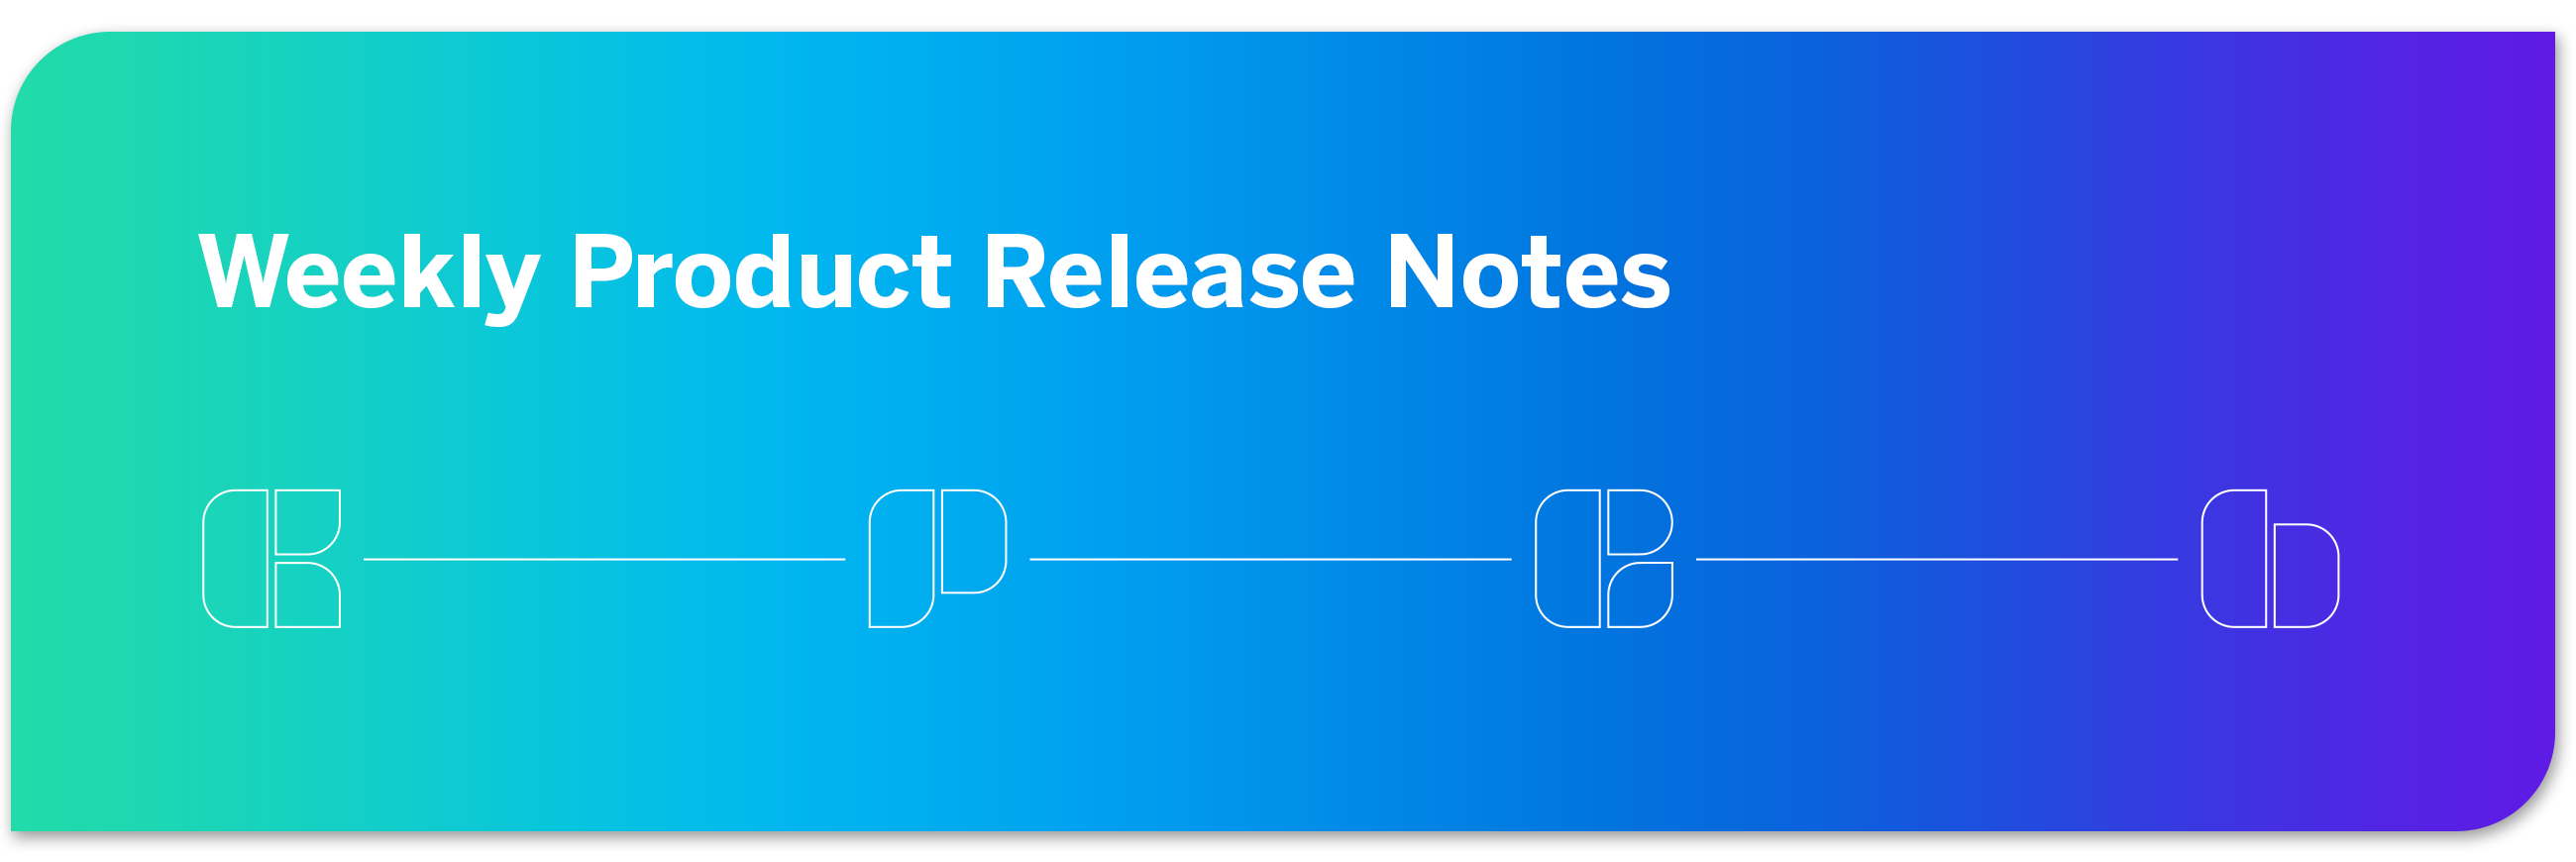 Weekly Product Release Notes.png